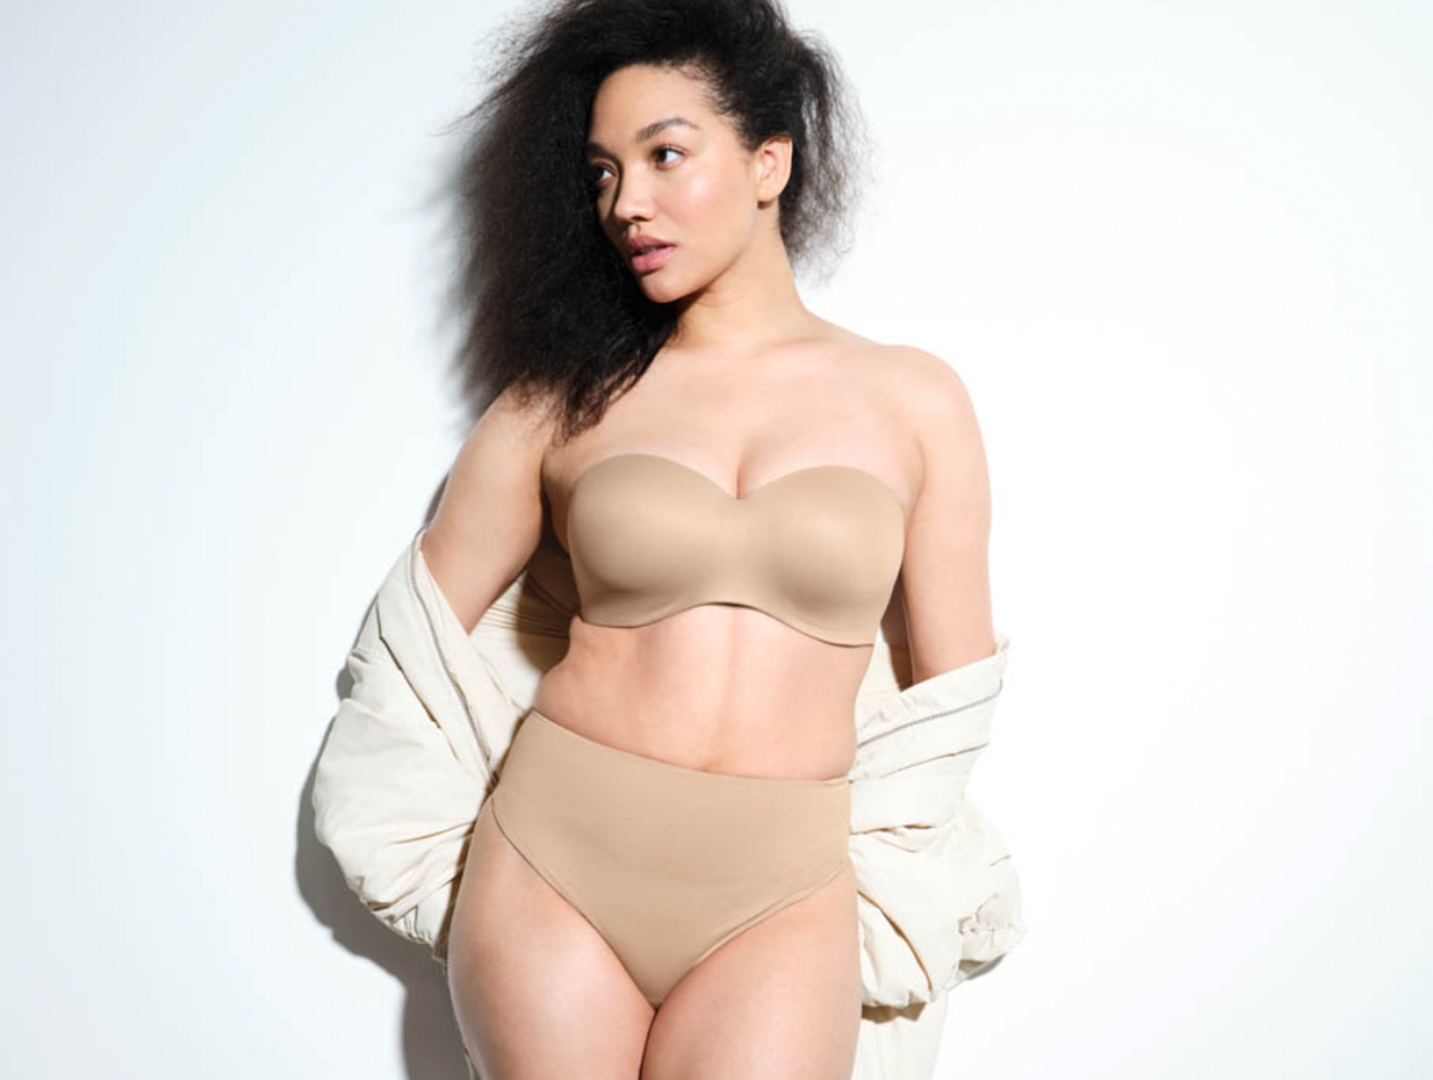 Experts Say Shapewear Could Be Harmful